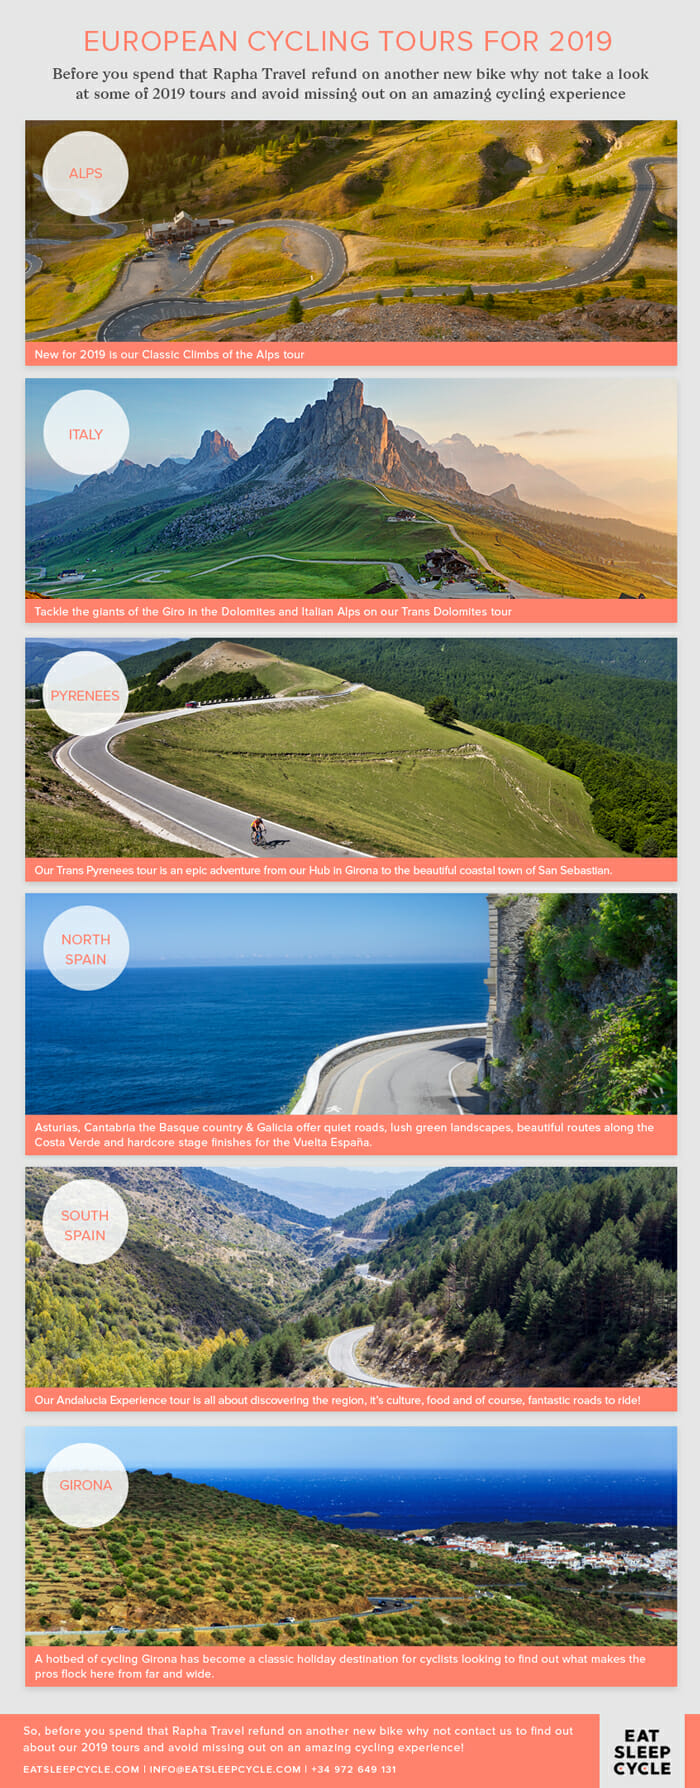 European Cycling Tours for 2019 - Eat Sleep Cycle